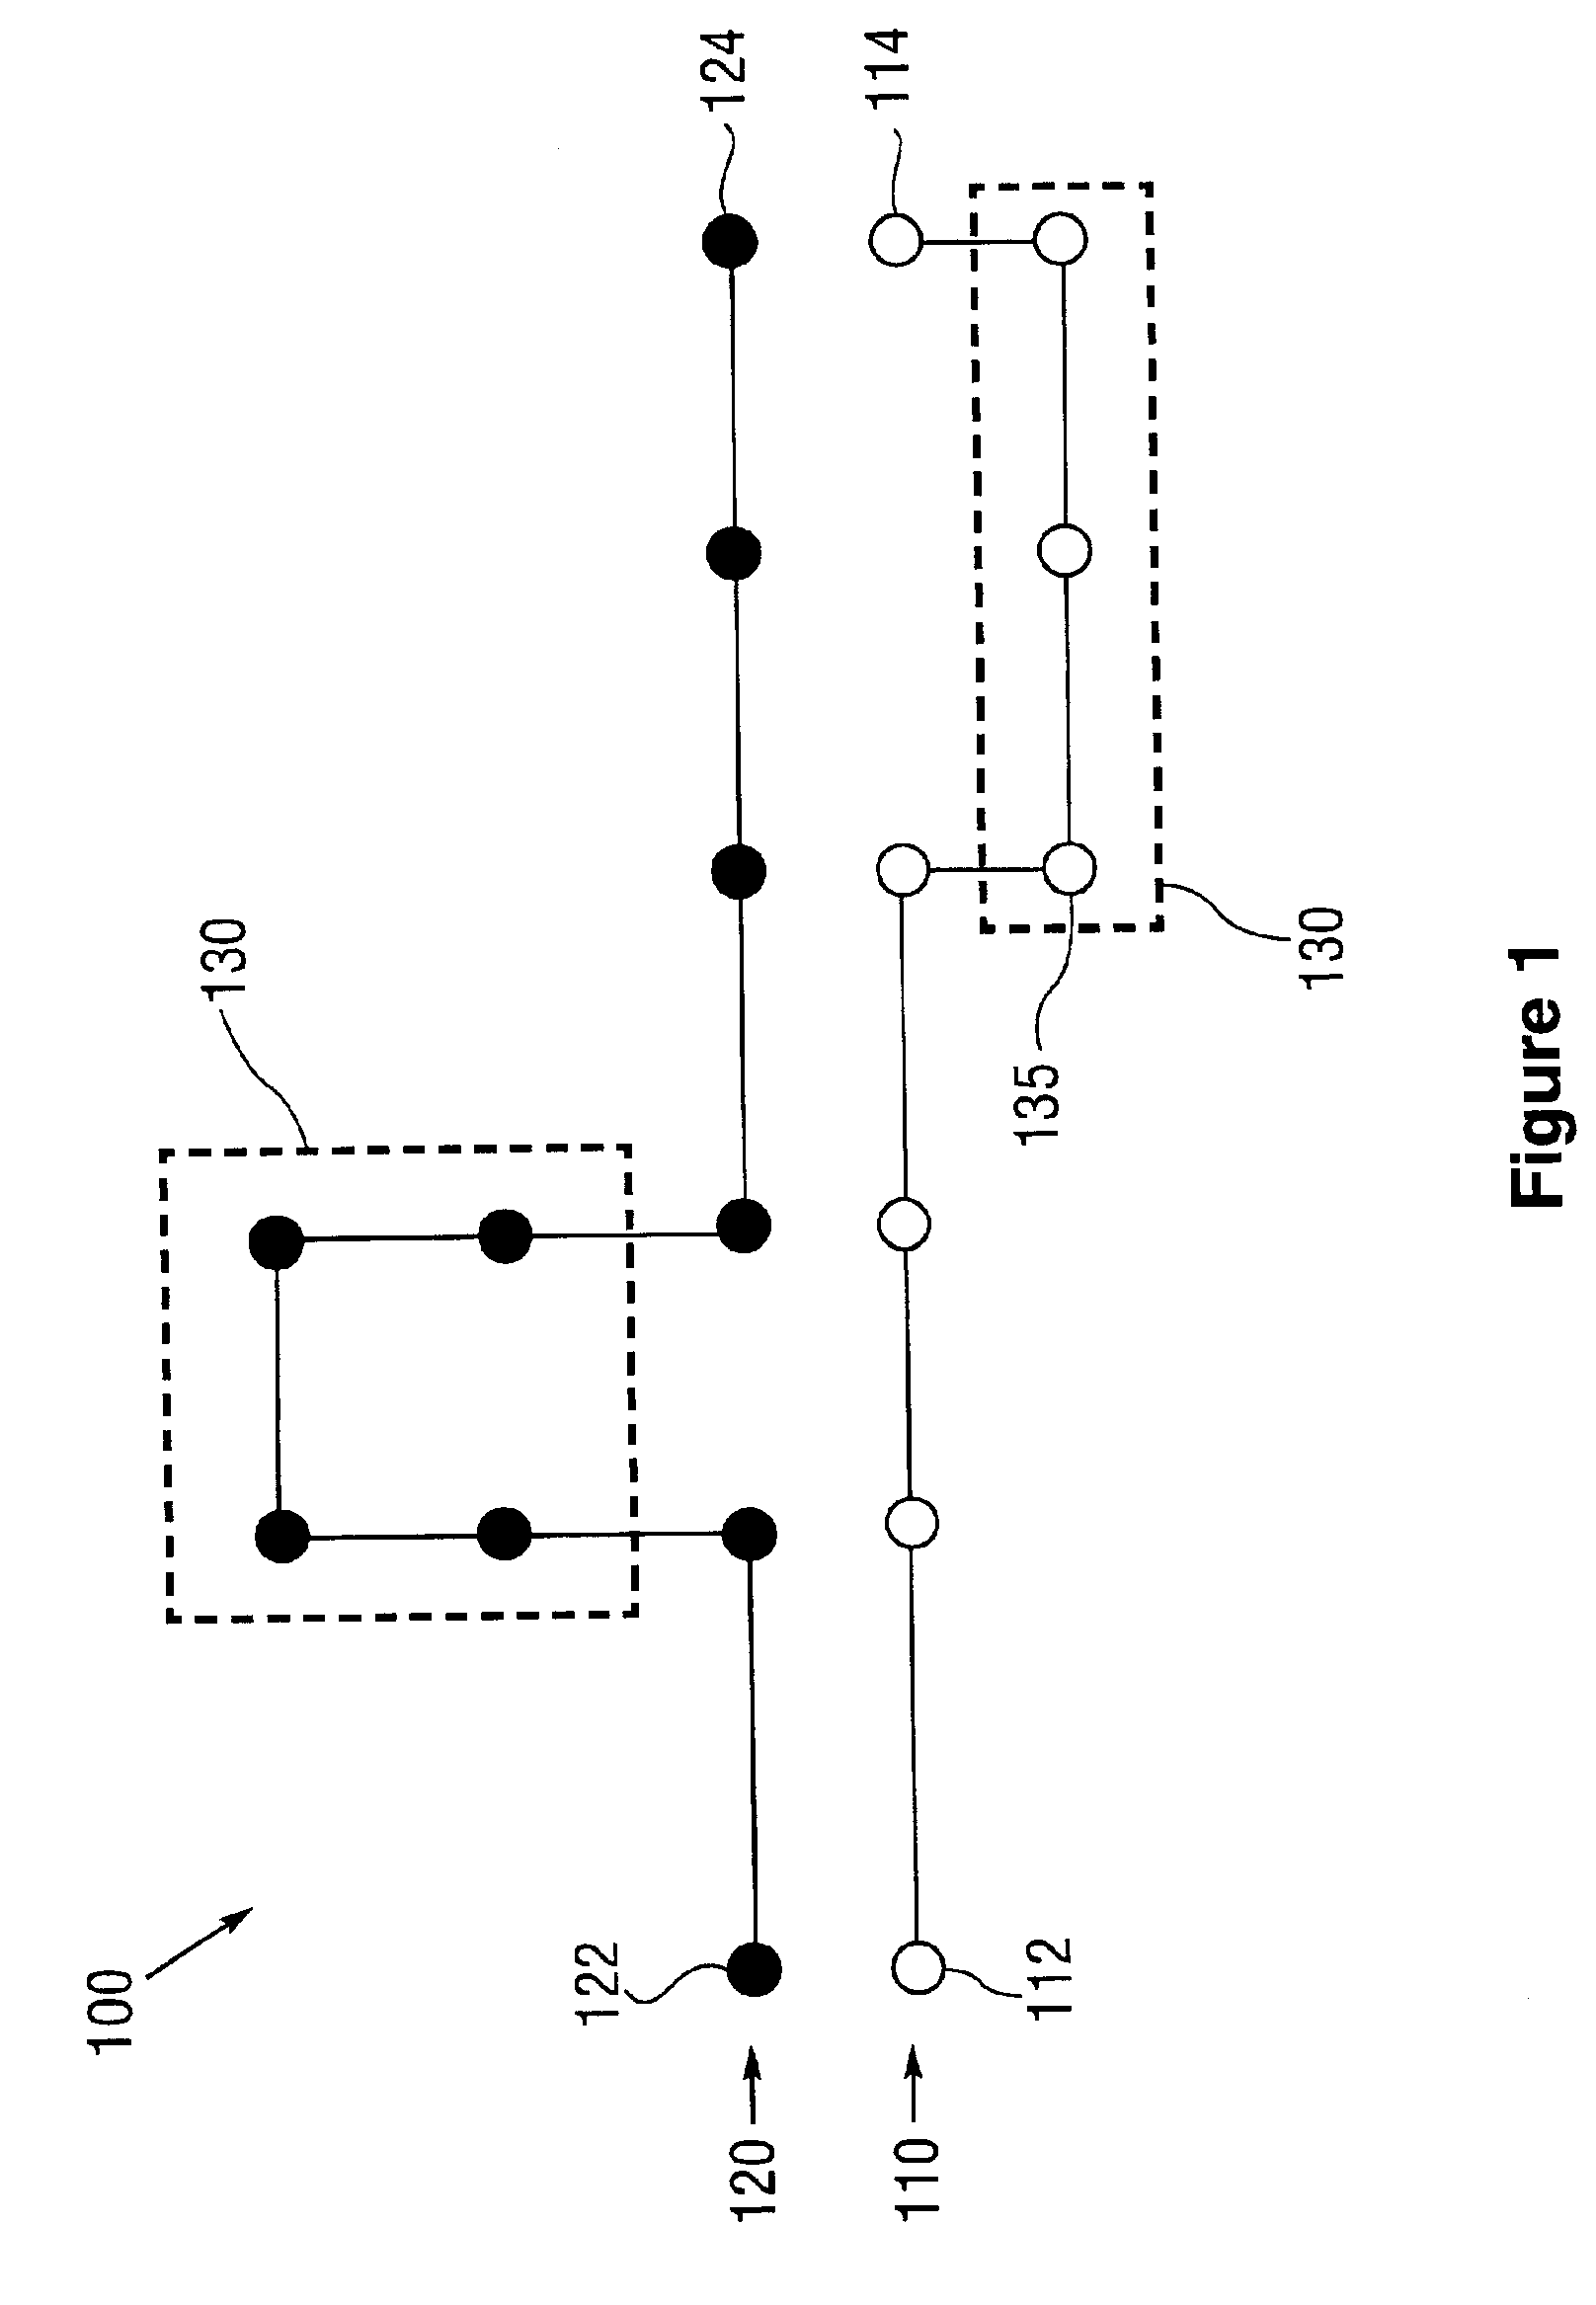 Method for protein structure alignment